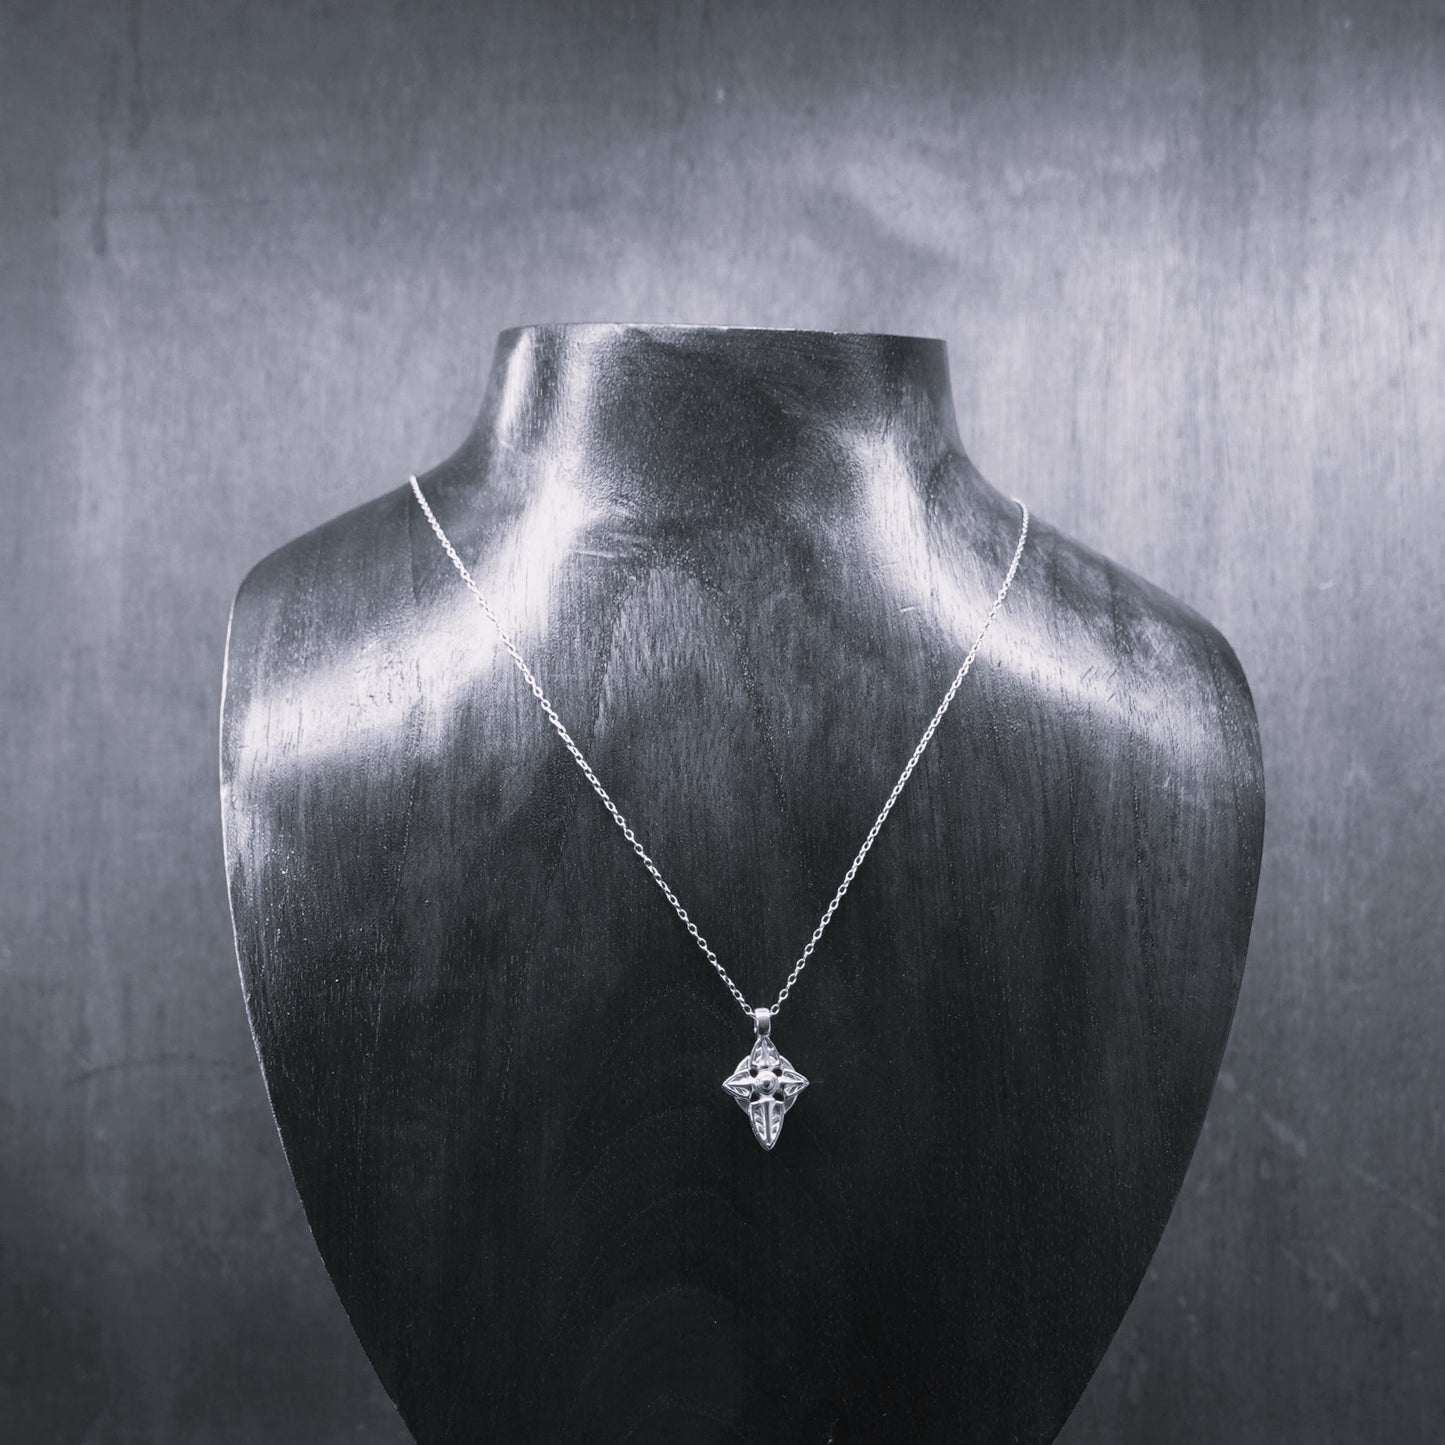 Platinum & diamond Cross charm with a solid platinum chain. Made to order. © Adrian Ashley